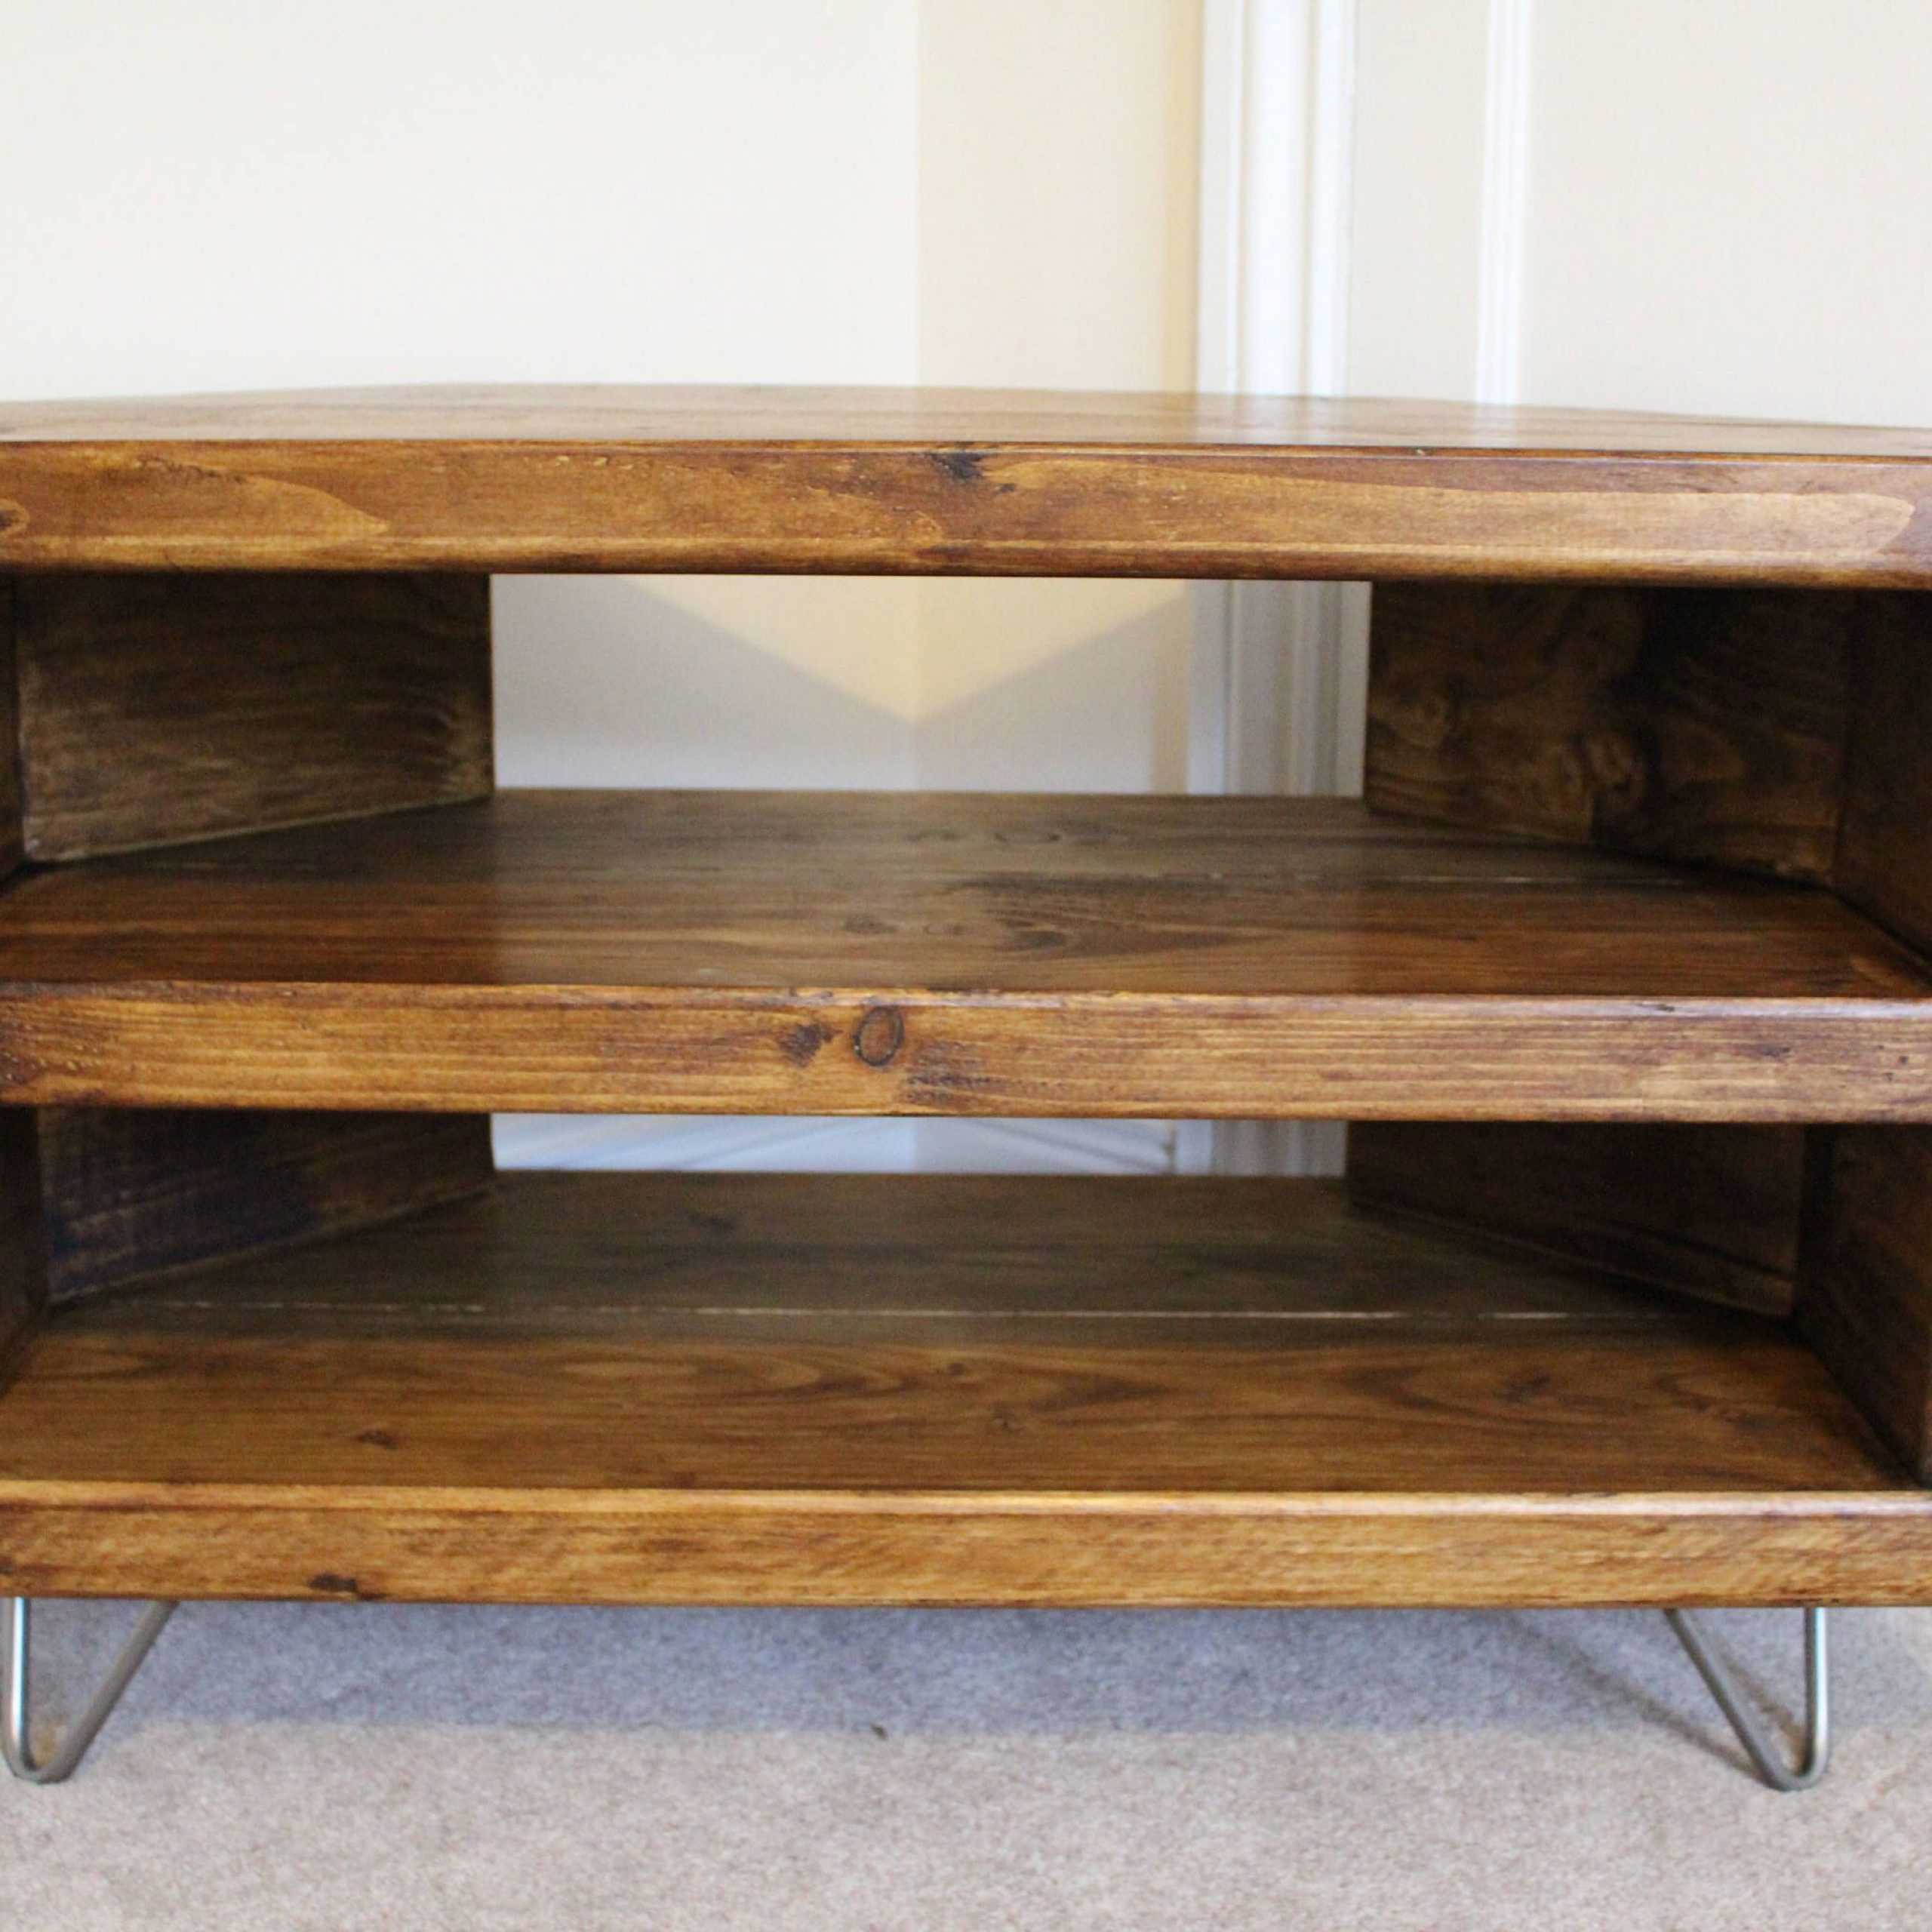 Reclaimed Rustic Wooden Corner Tv Stand Cabinet Unit Solid For Rustic Wood Tv Cabinets (View 8 of 15)